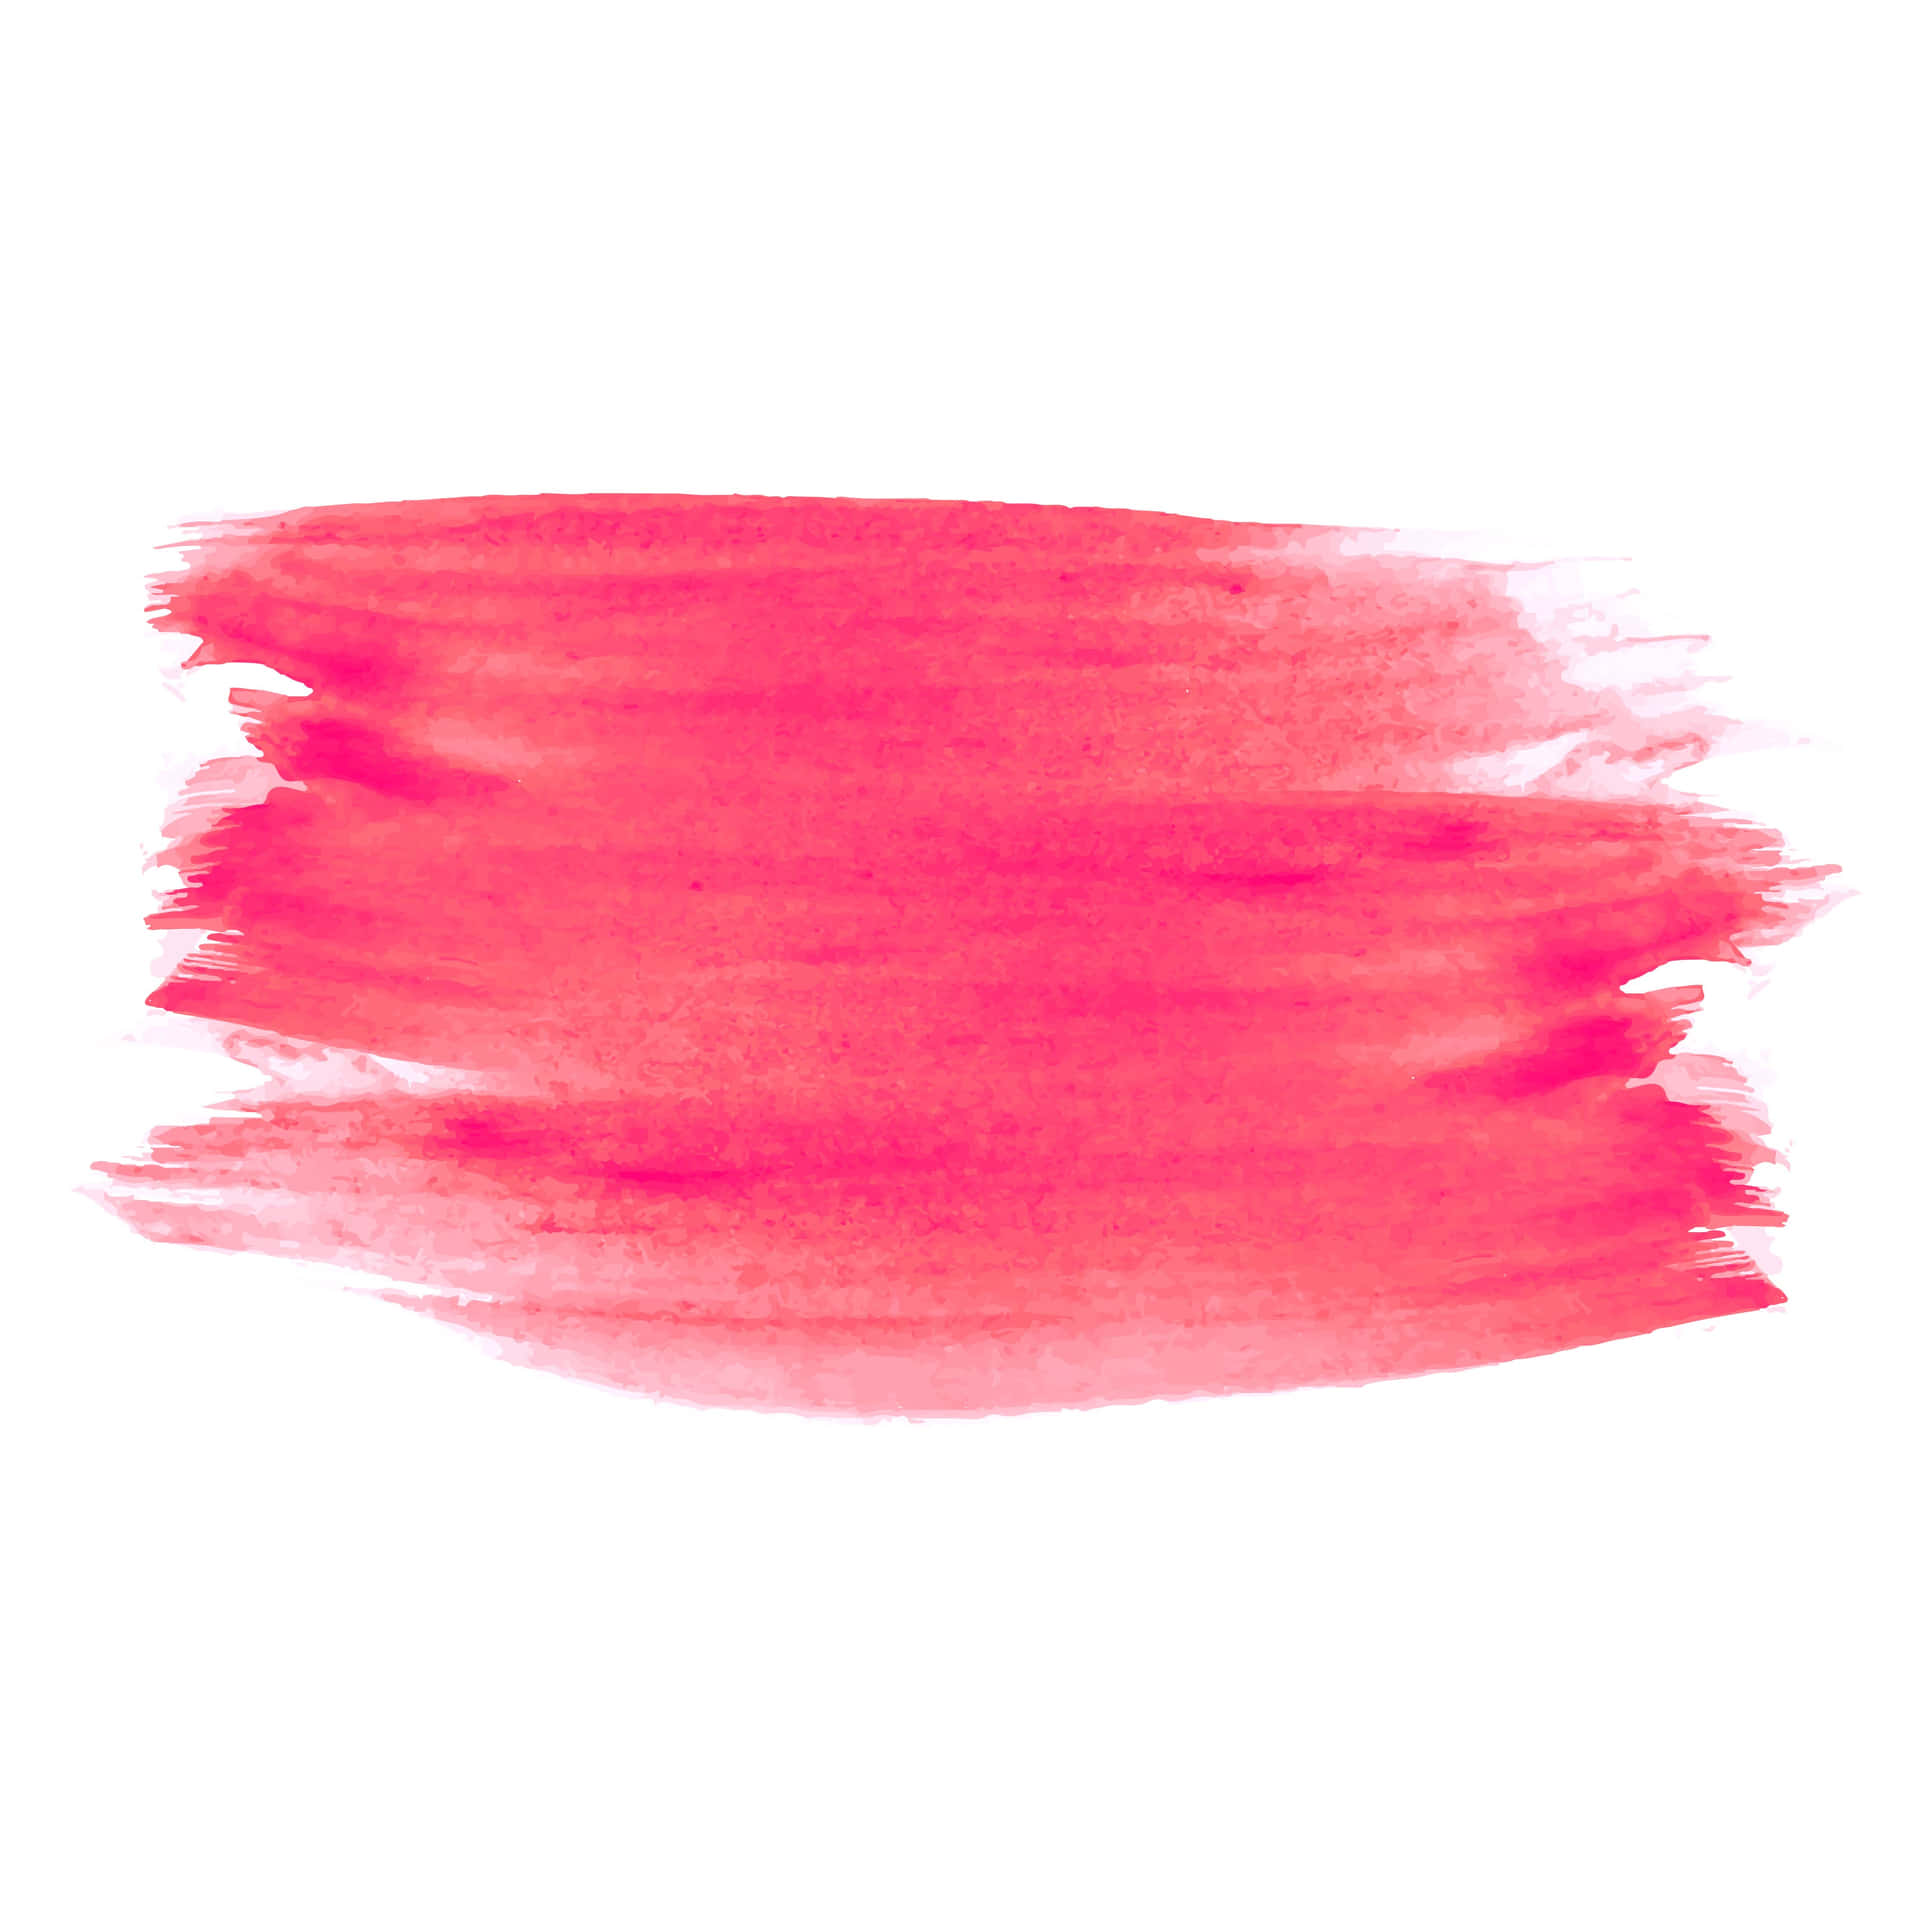 Captivating Pink Watercolor Background